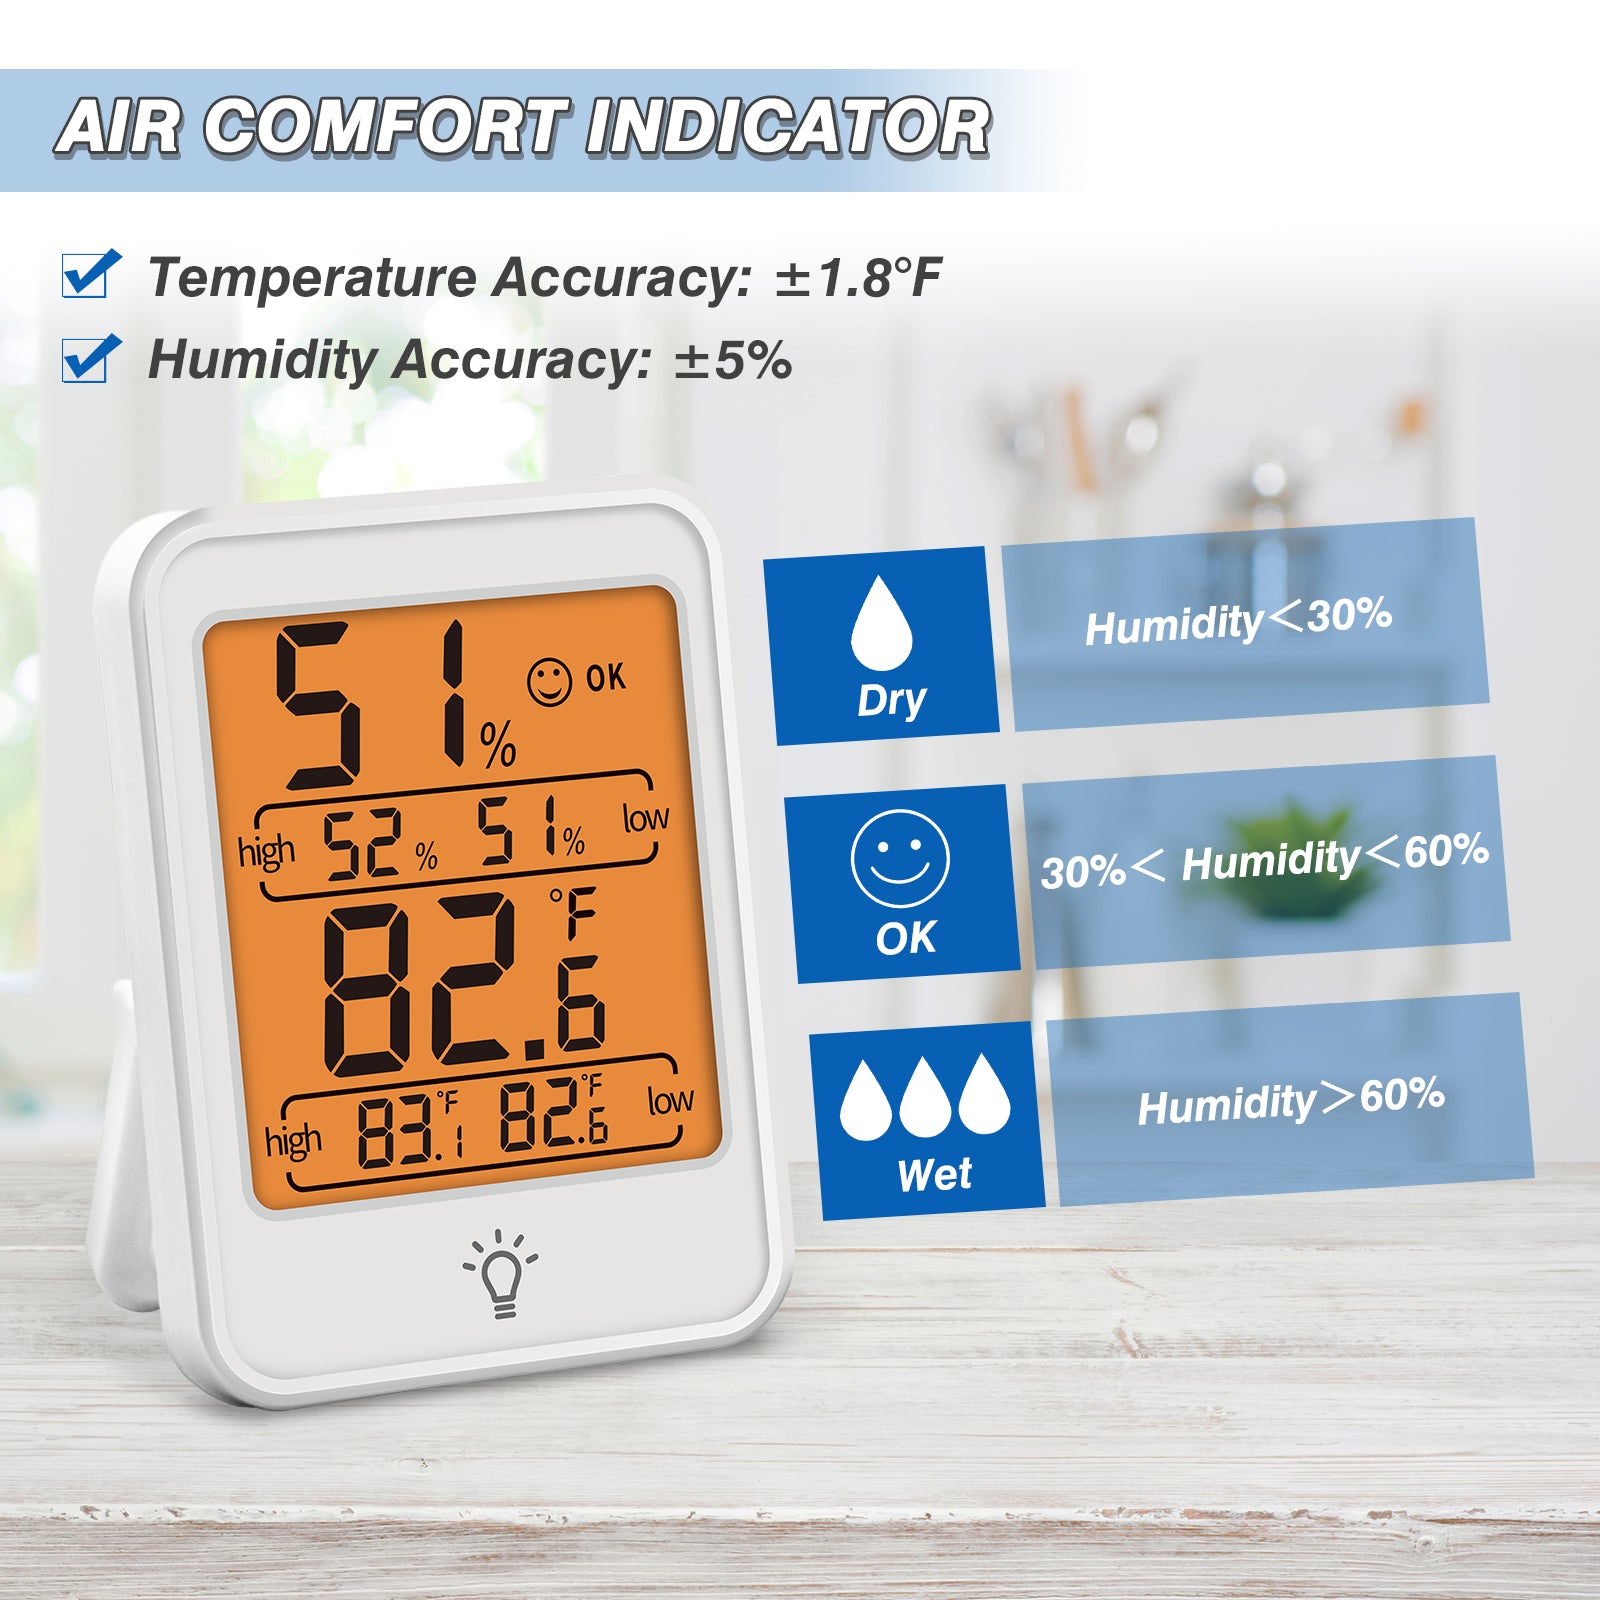 Hgycpp Indoor Outdoor Thermometer Hygrometer 2 in 1 Temperature Humidity Gauge Analog, Size: 57x57x12mm/2.2x2.2x0.5 inch, Green